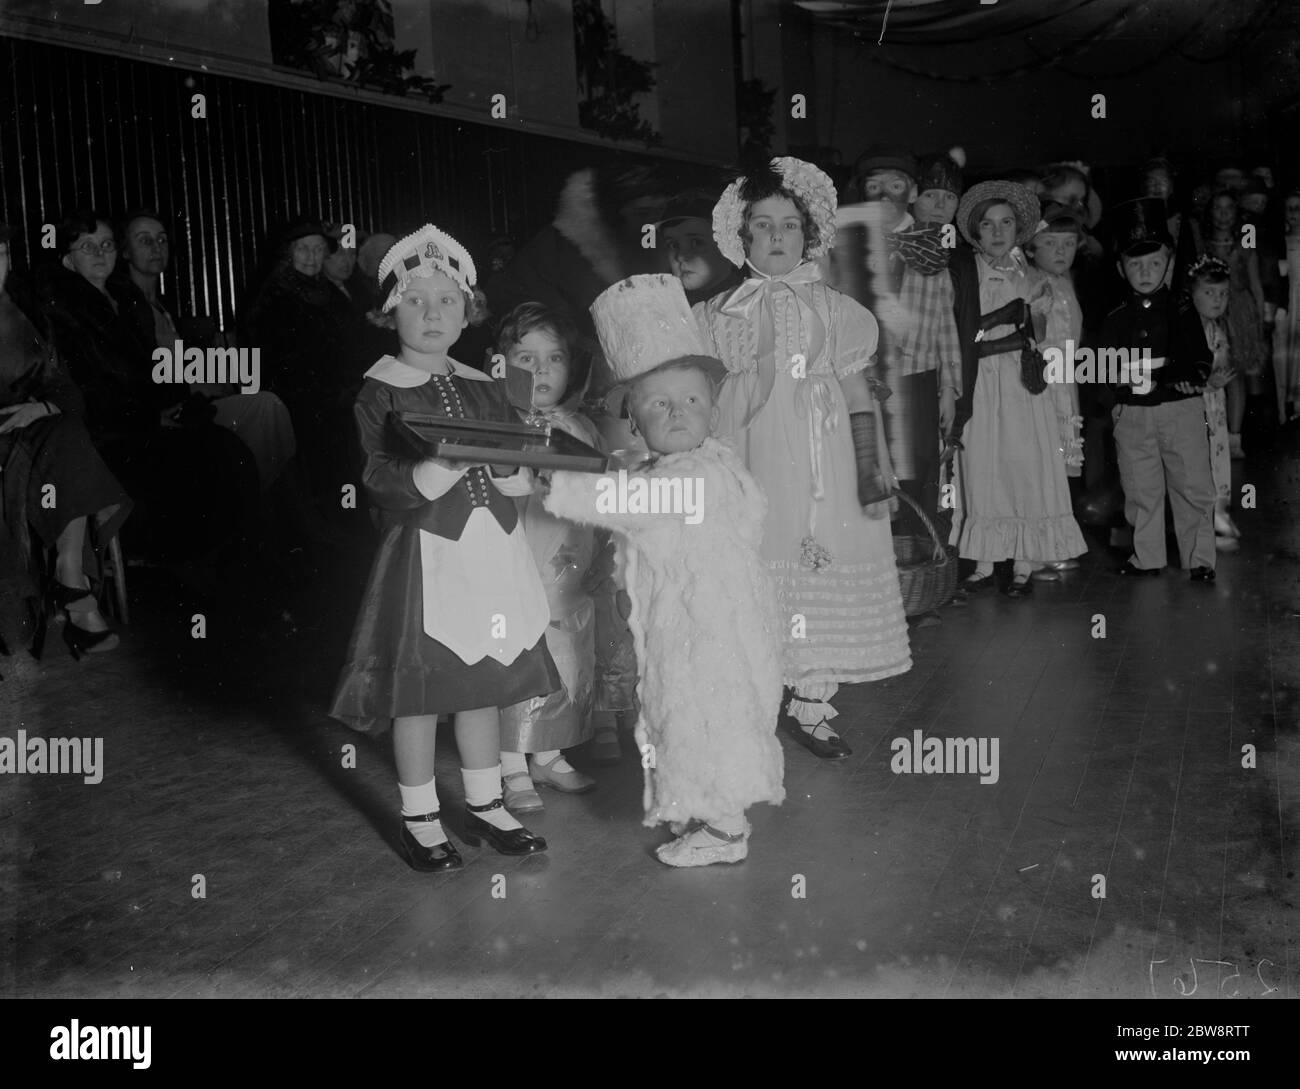 Kinder in Kostümen ein NSPCC (National Society for the Prevention of Cruelty to Children) Party in Erith, Kent. 1935 Stockfoto